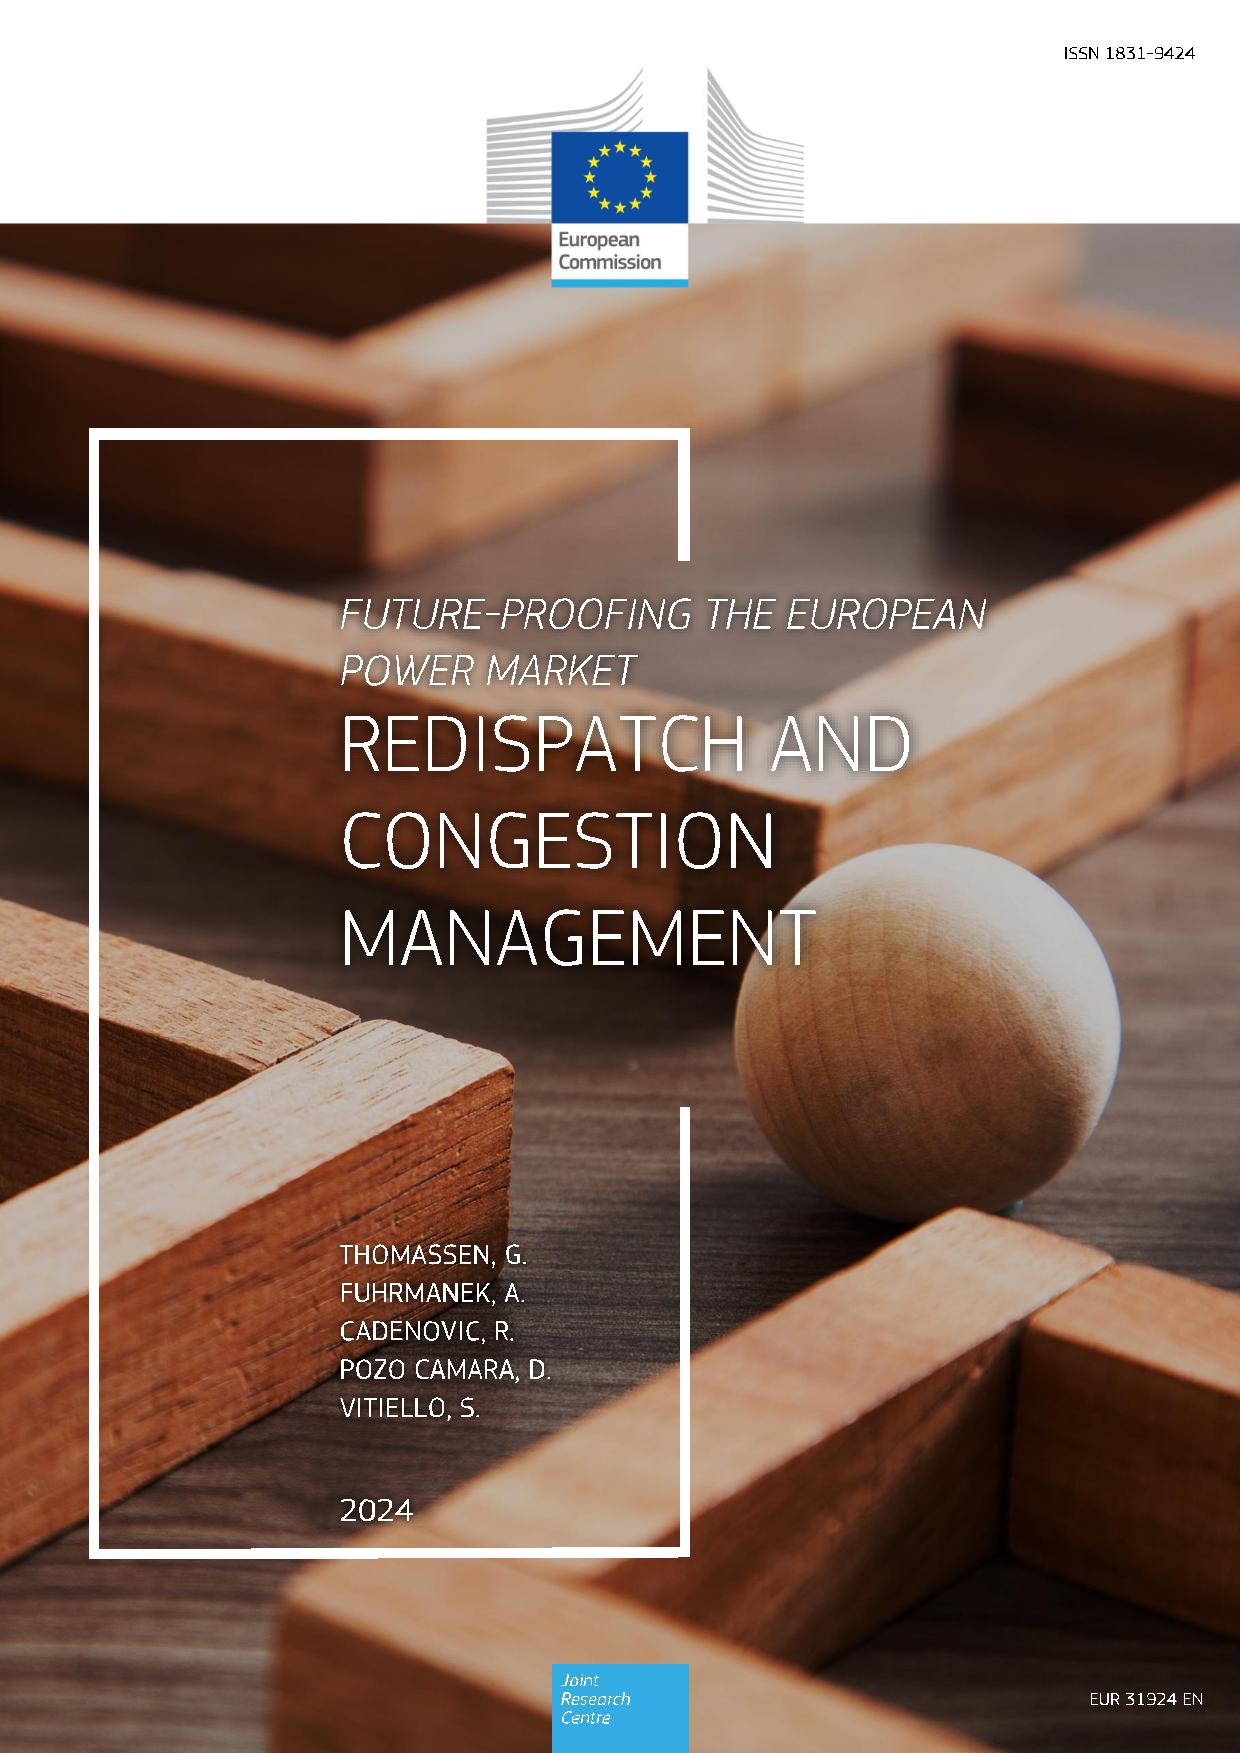 2024 - Redispatch and Congestion Management